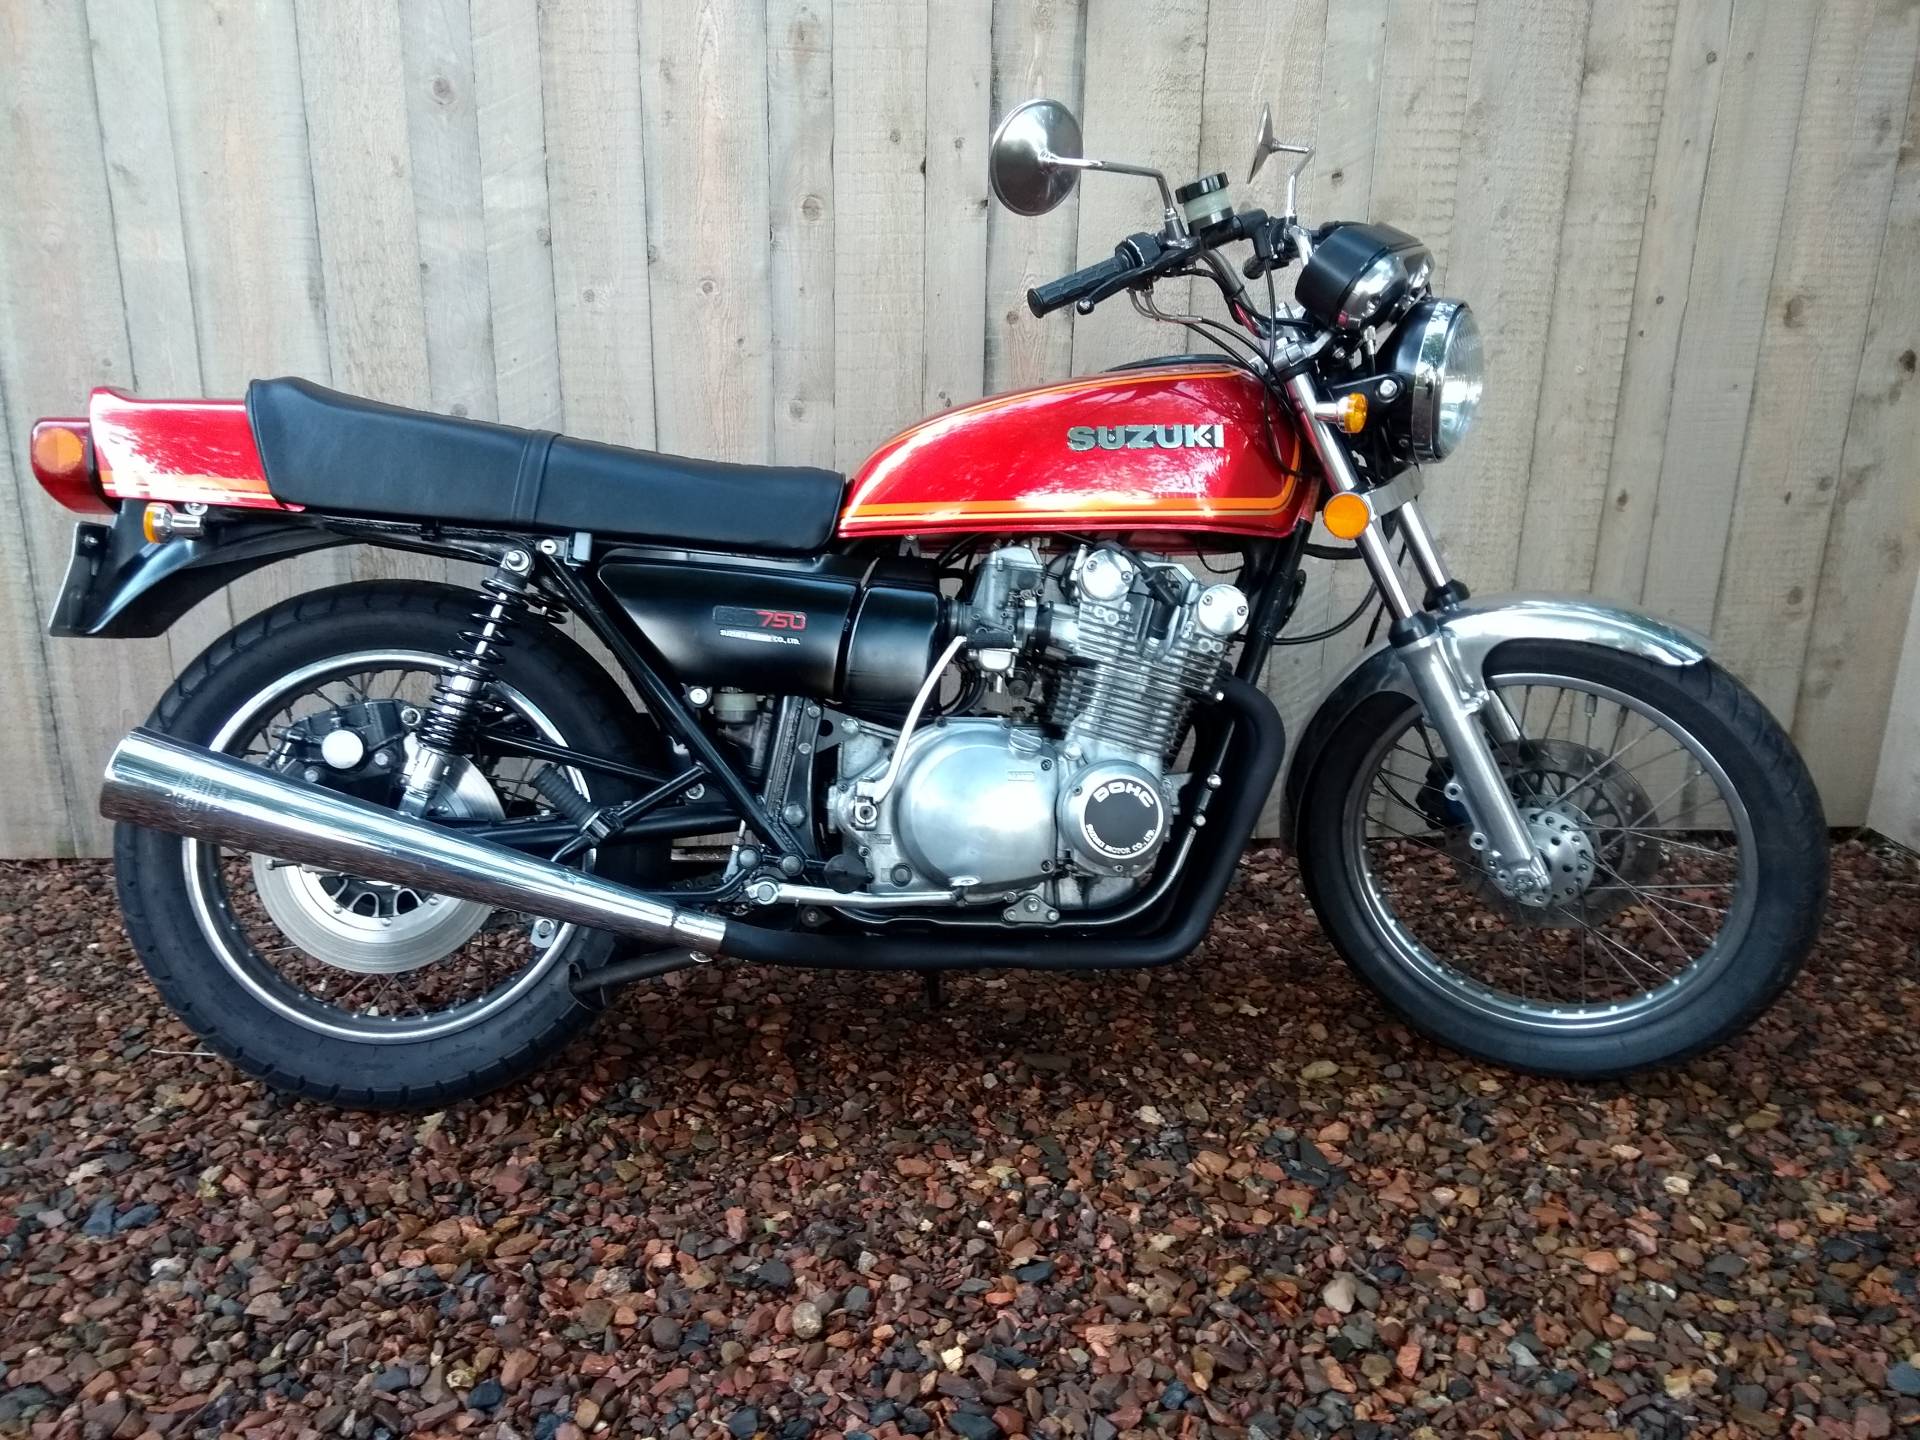 For Sale Suzuki GS 750 (1977) offered for GBP 2,600